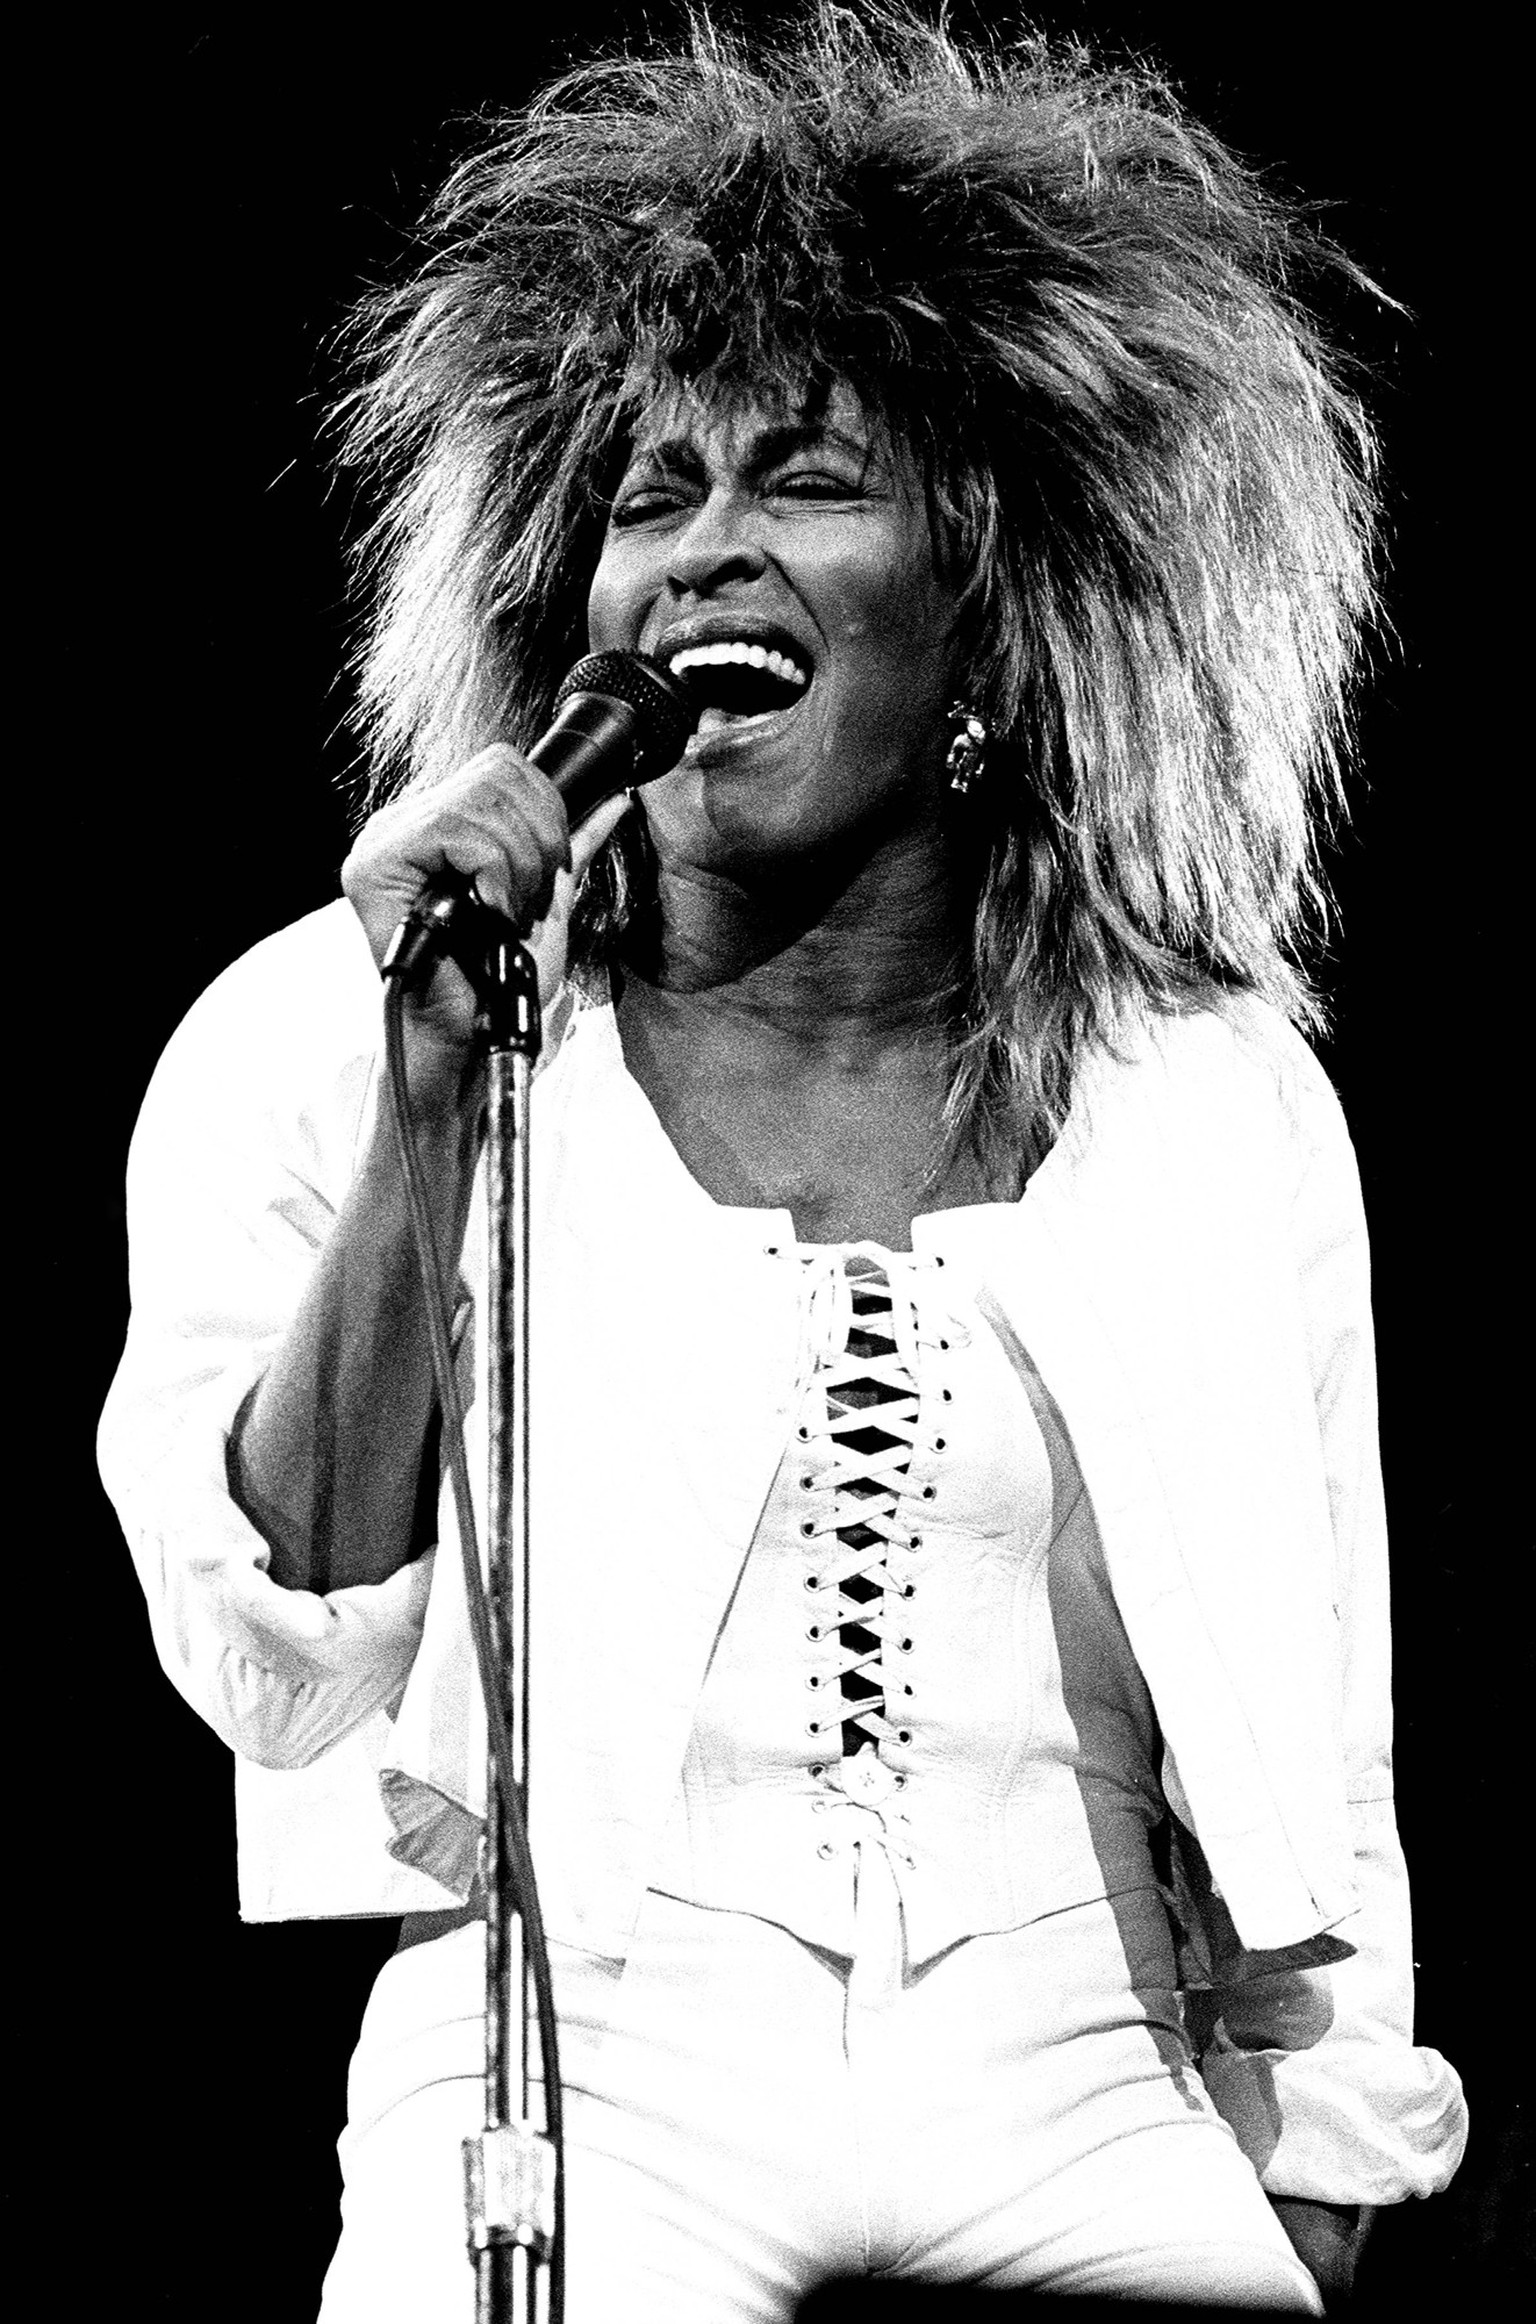 **FILE PHOTO** Tina Turner Has Passed Away, OAKLAND, CA - OCTOBER 1985: Tina Turner in concert at the Oakland-Alameda County Coliseum in Oakland, California in October 1985. PUBLICATIONxNOTxINxUSA Cop ...